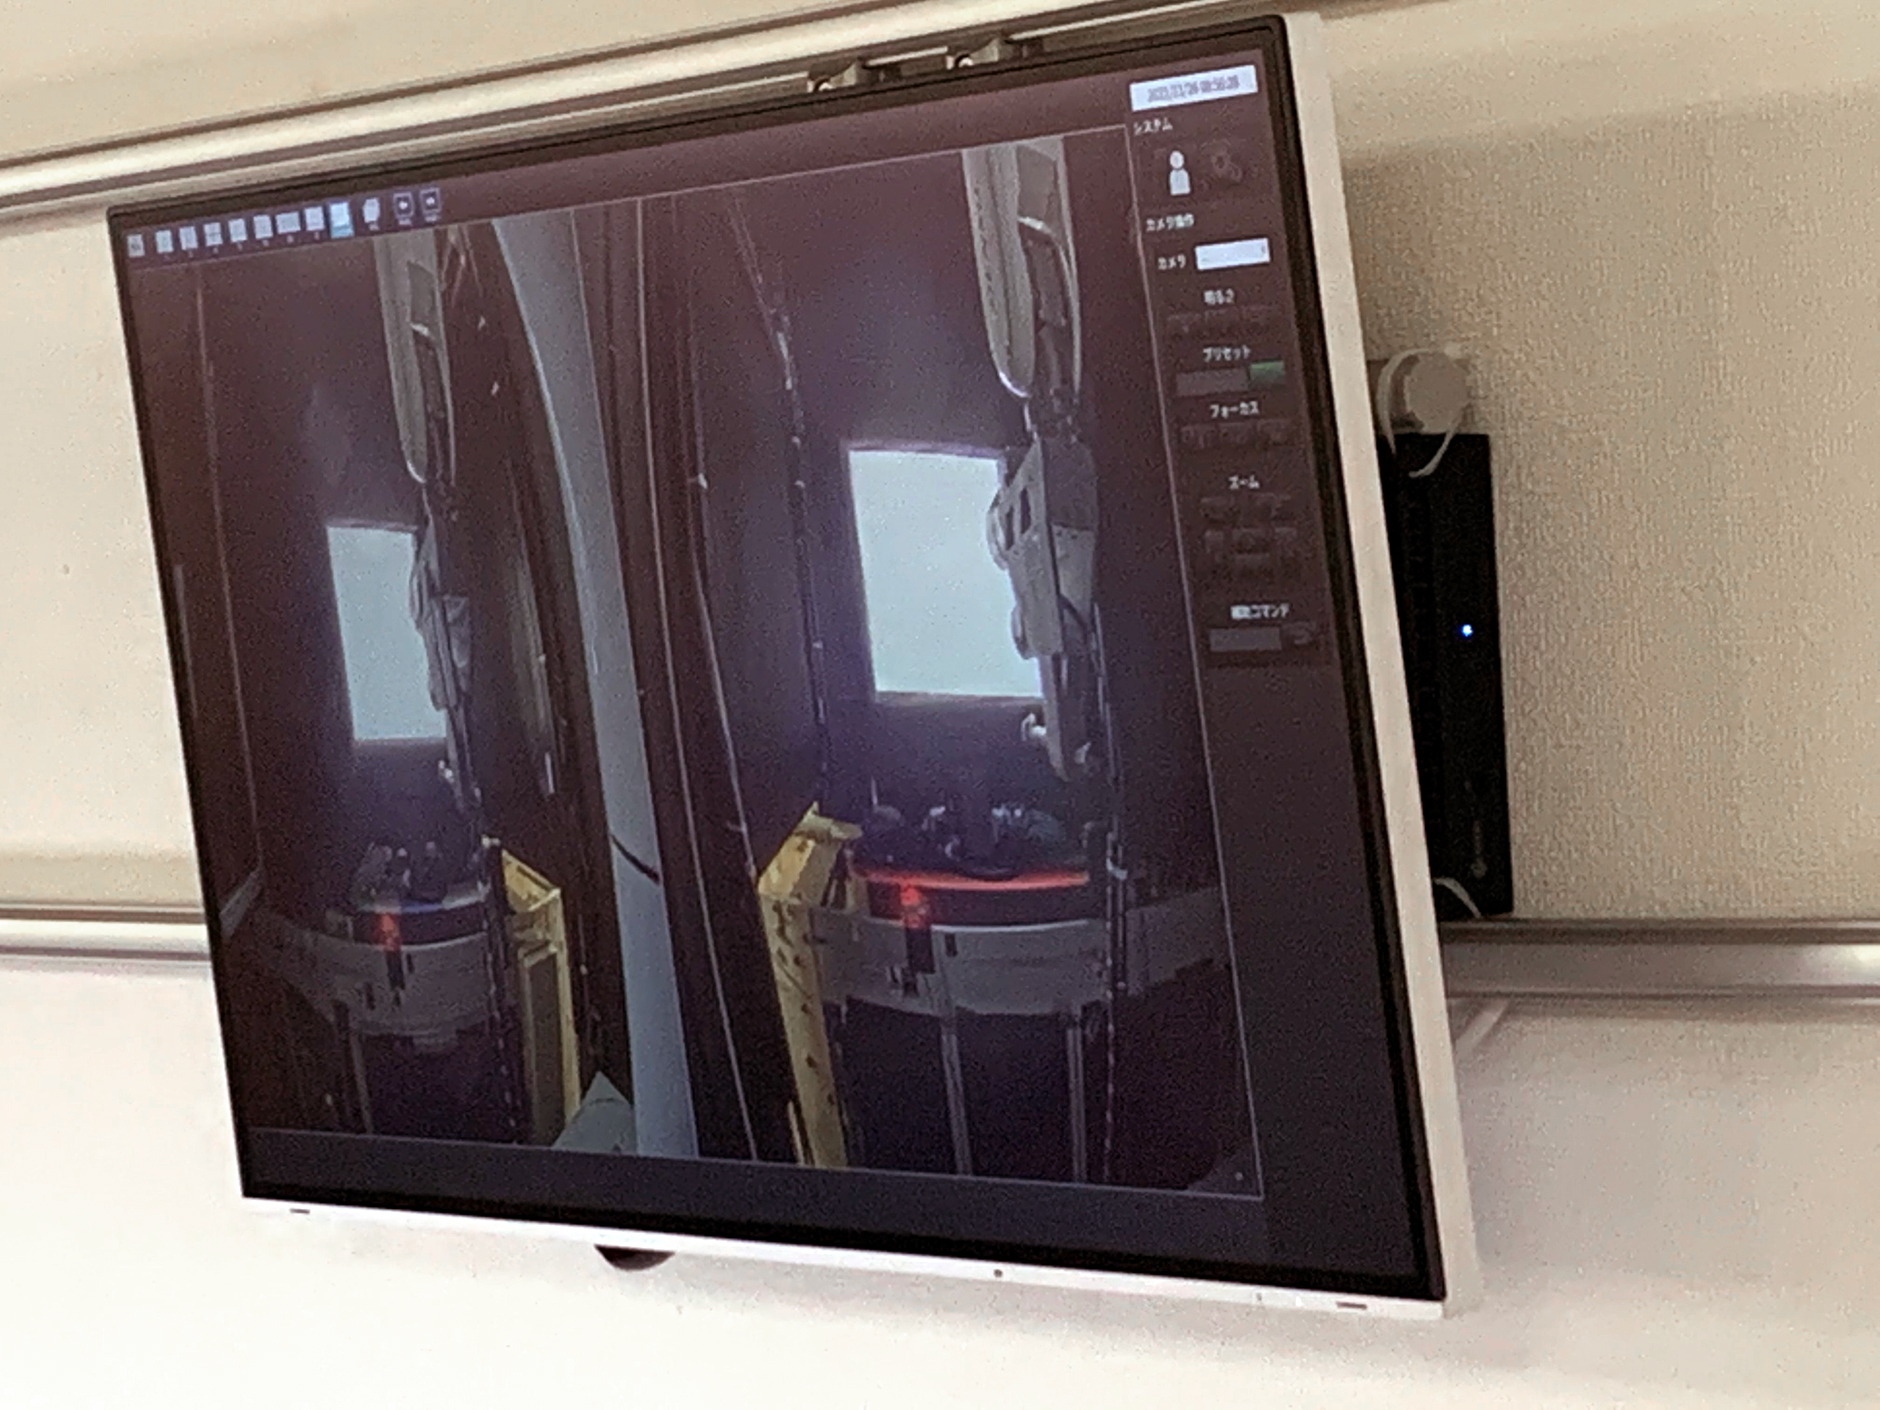 Large-screen monitor enables visibility of the unmanned inspection room